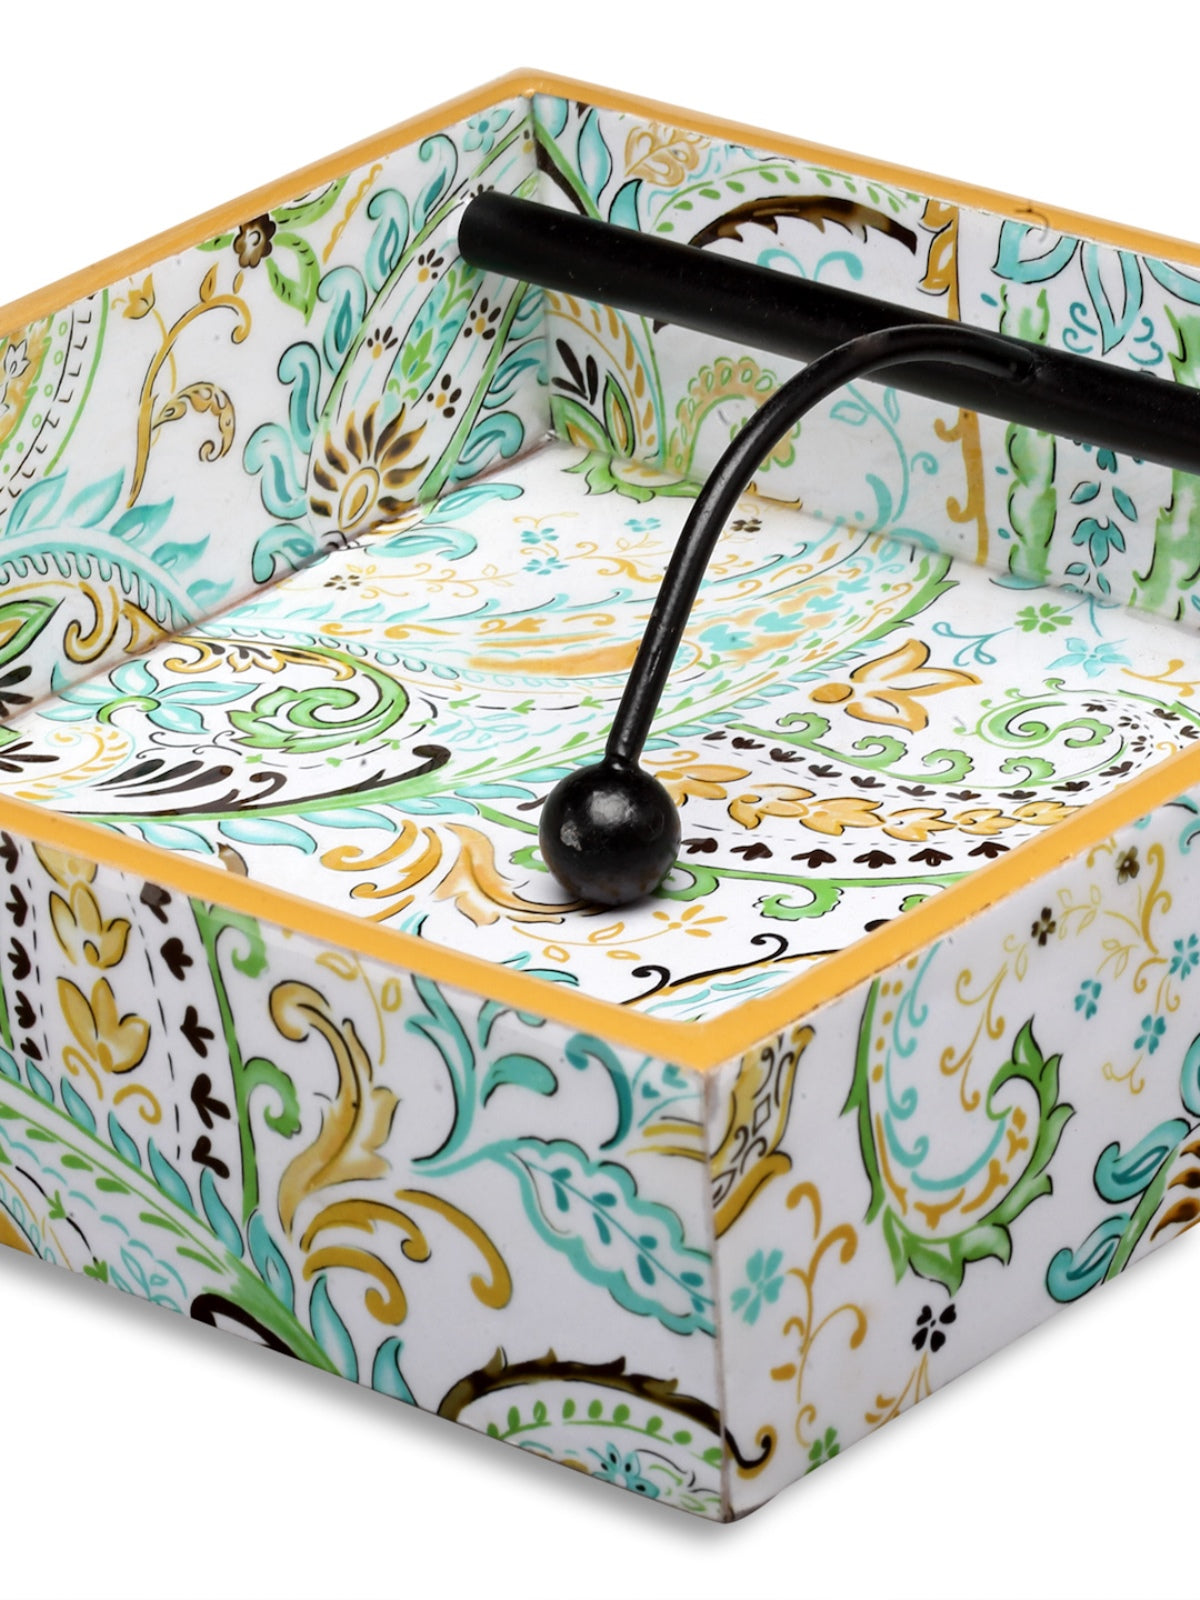 Green & White Paisley Patterned Wooden Tissue Square Tray